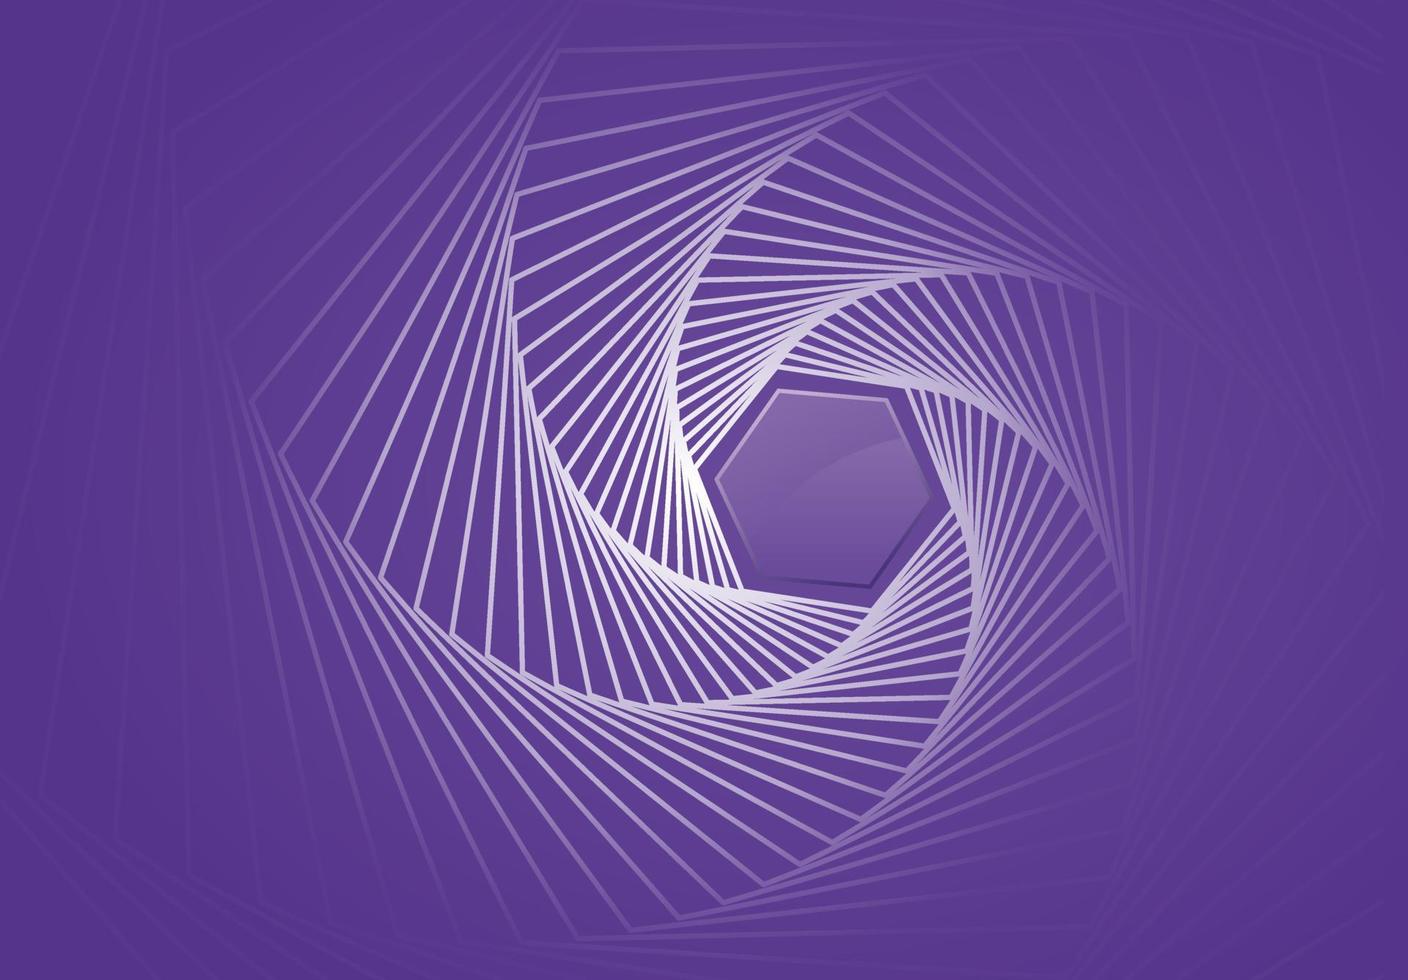 Abstract purple background with spiral geometric lines vector